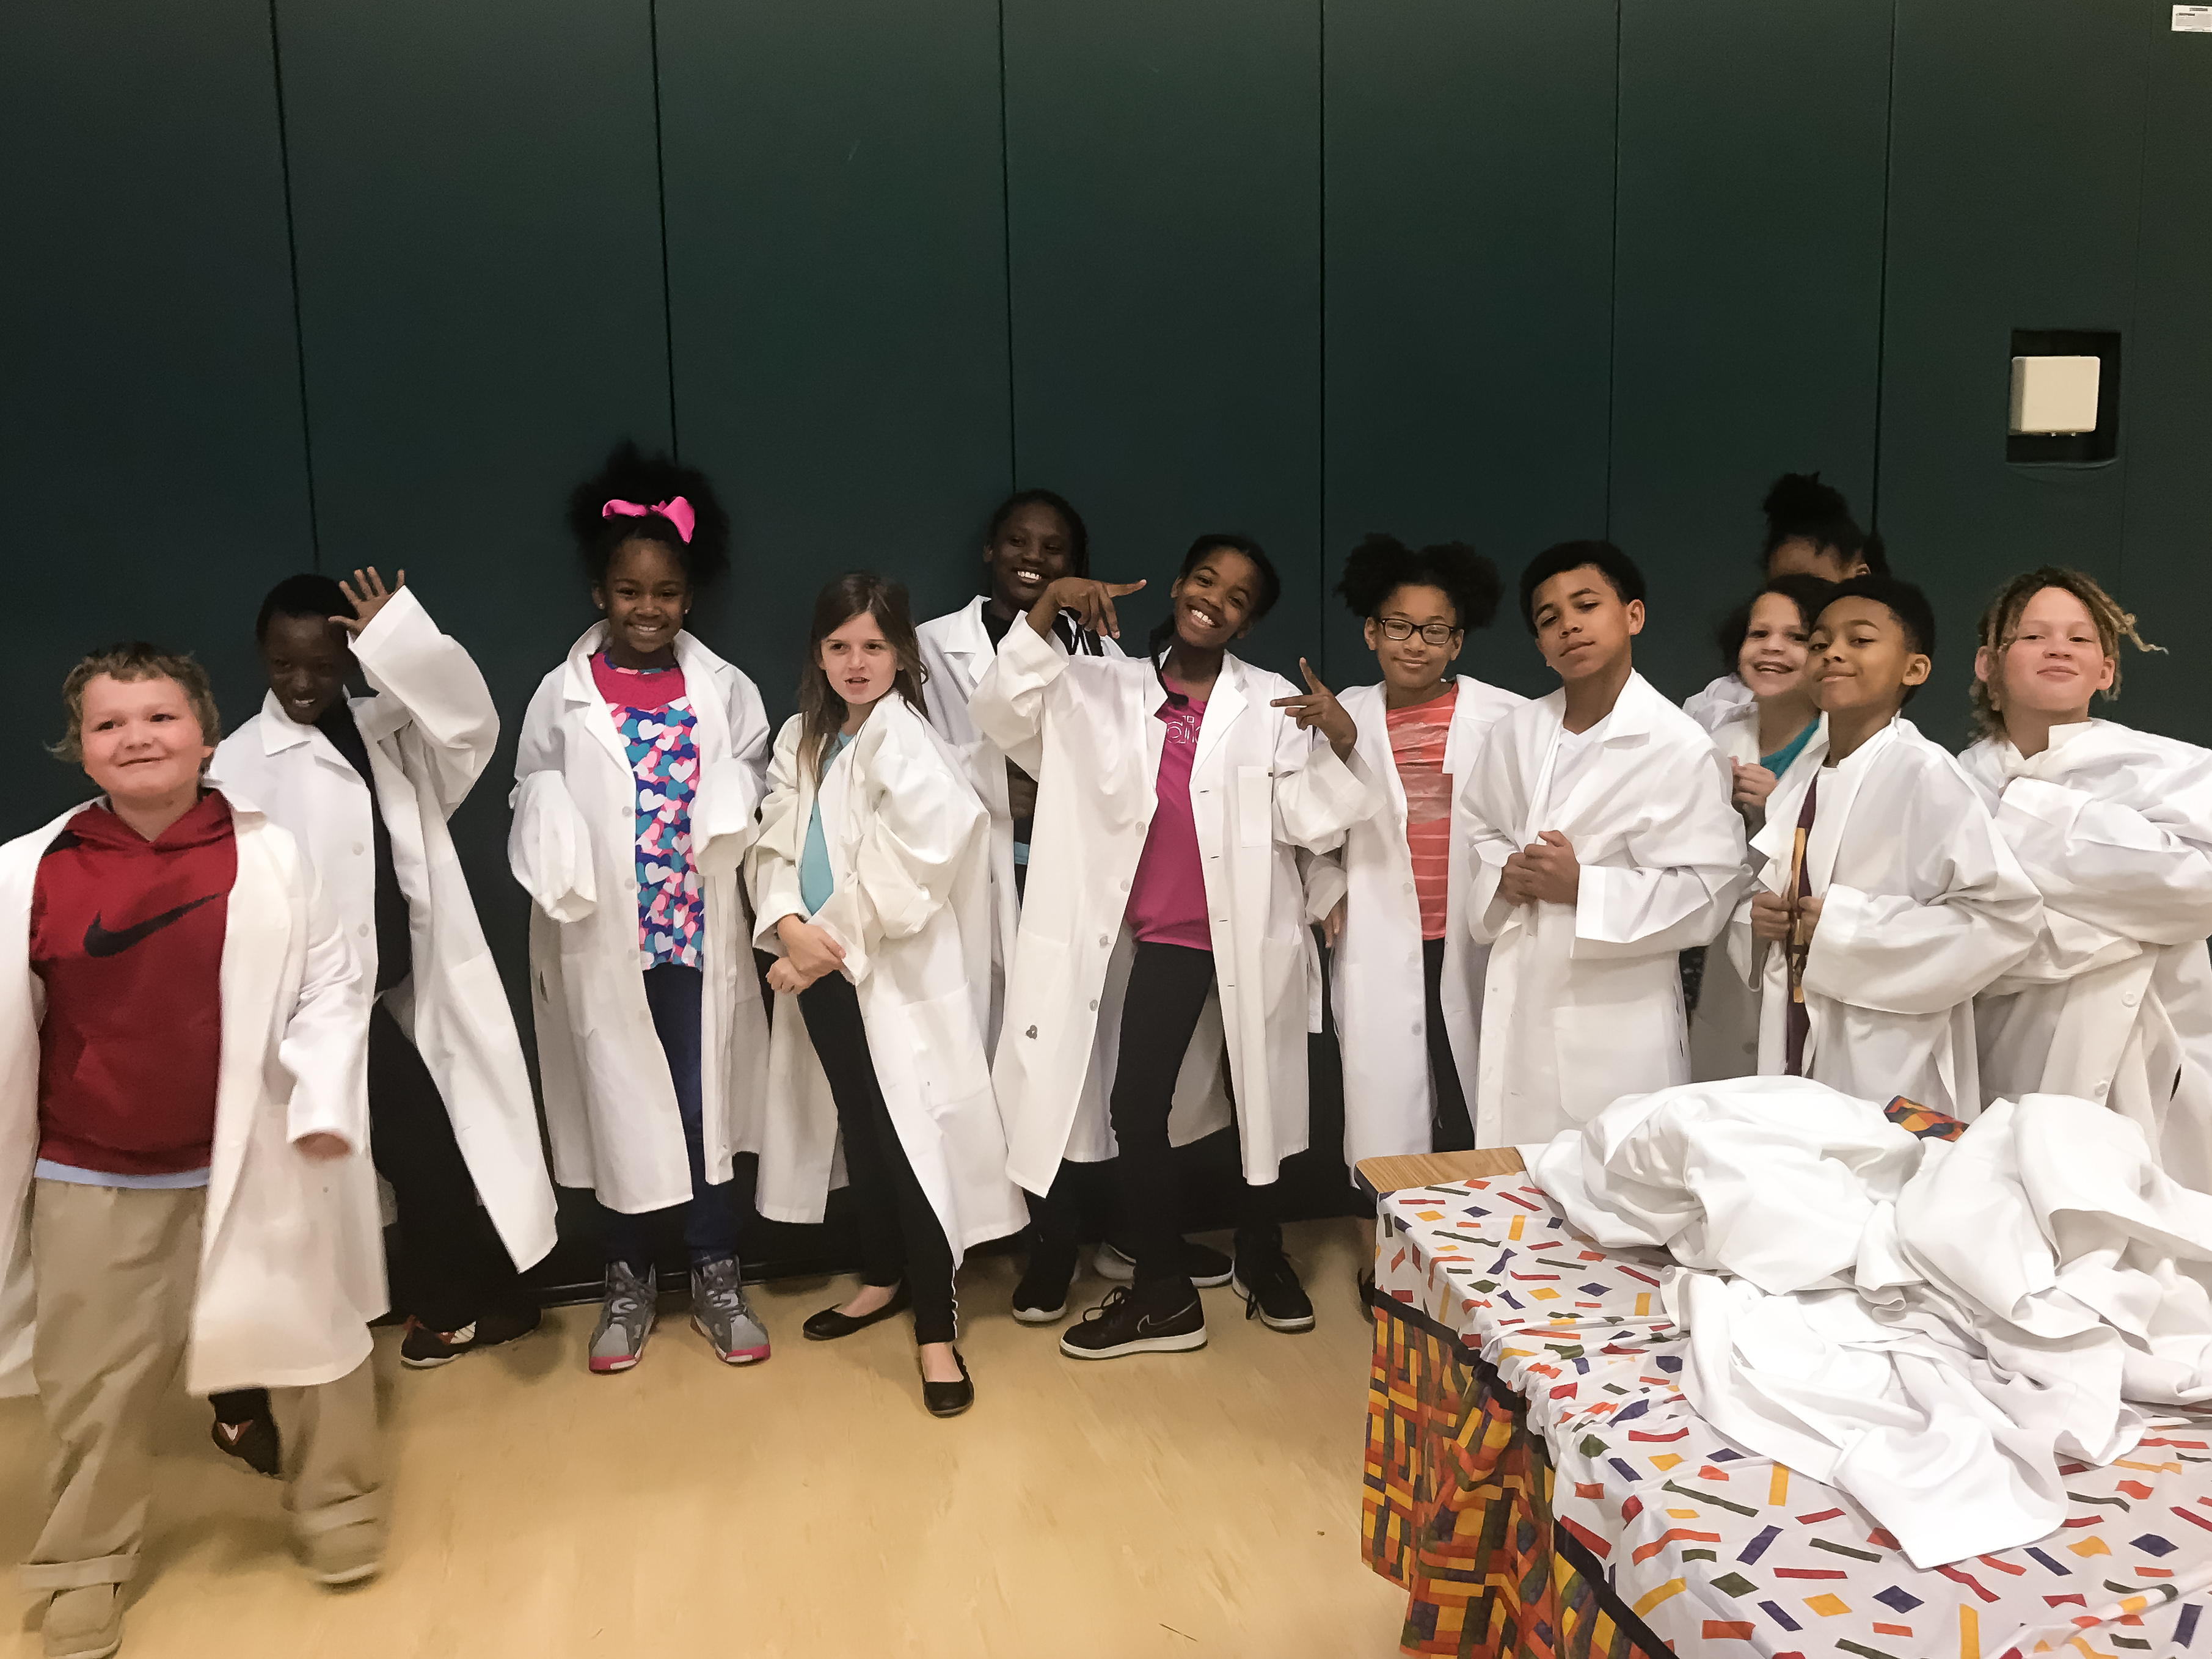 Children in lab coats at event.